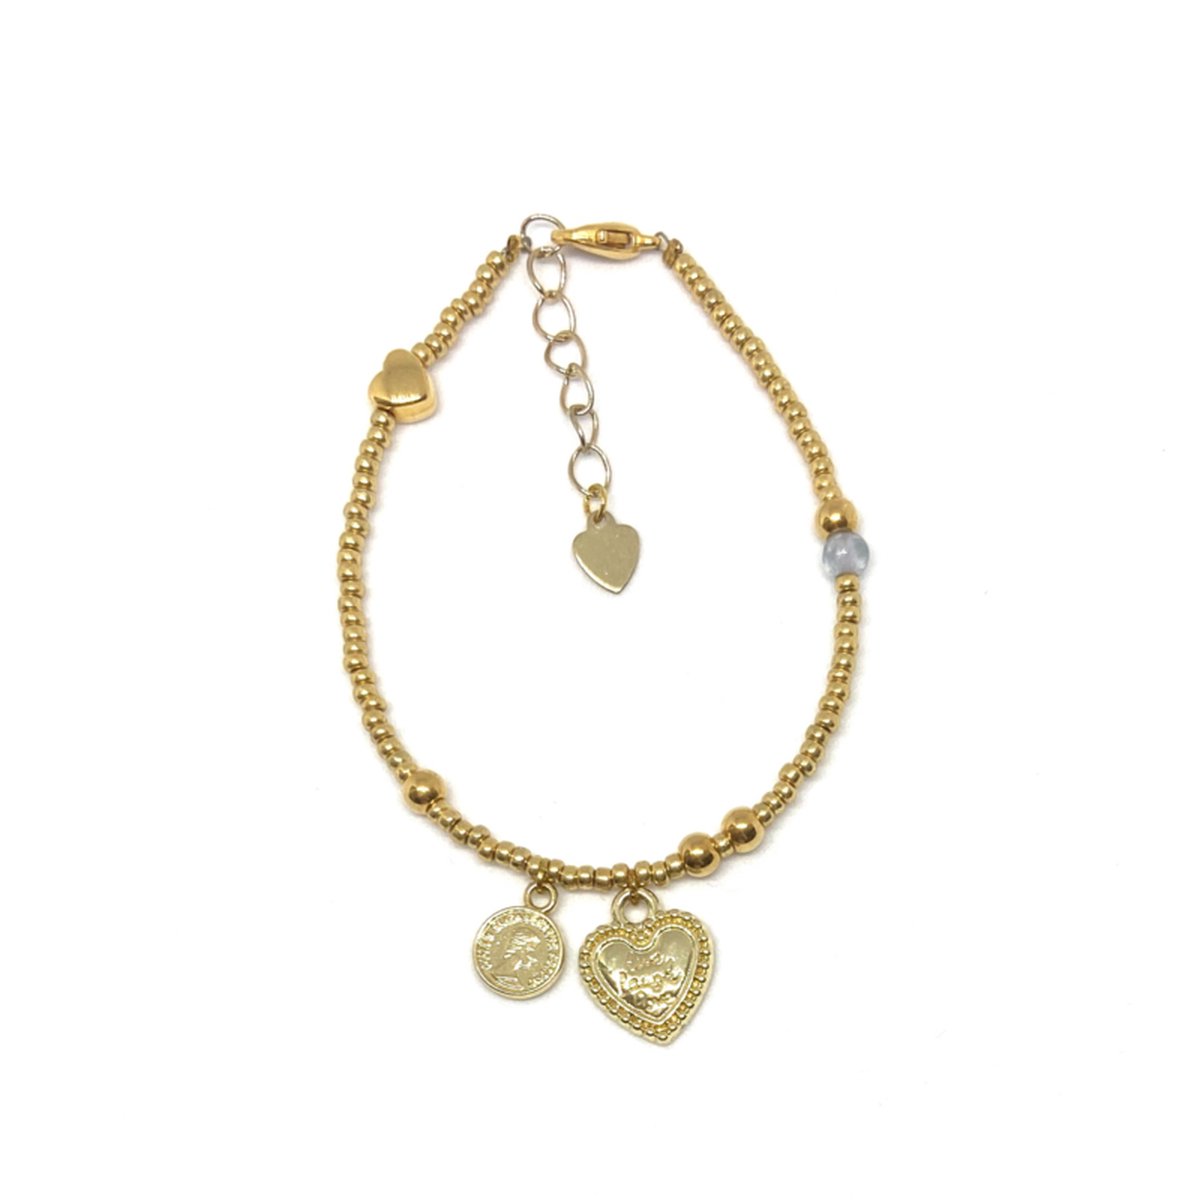 Bracelet with 2 beads - gold